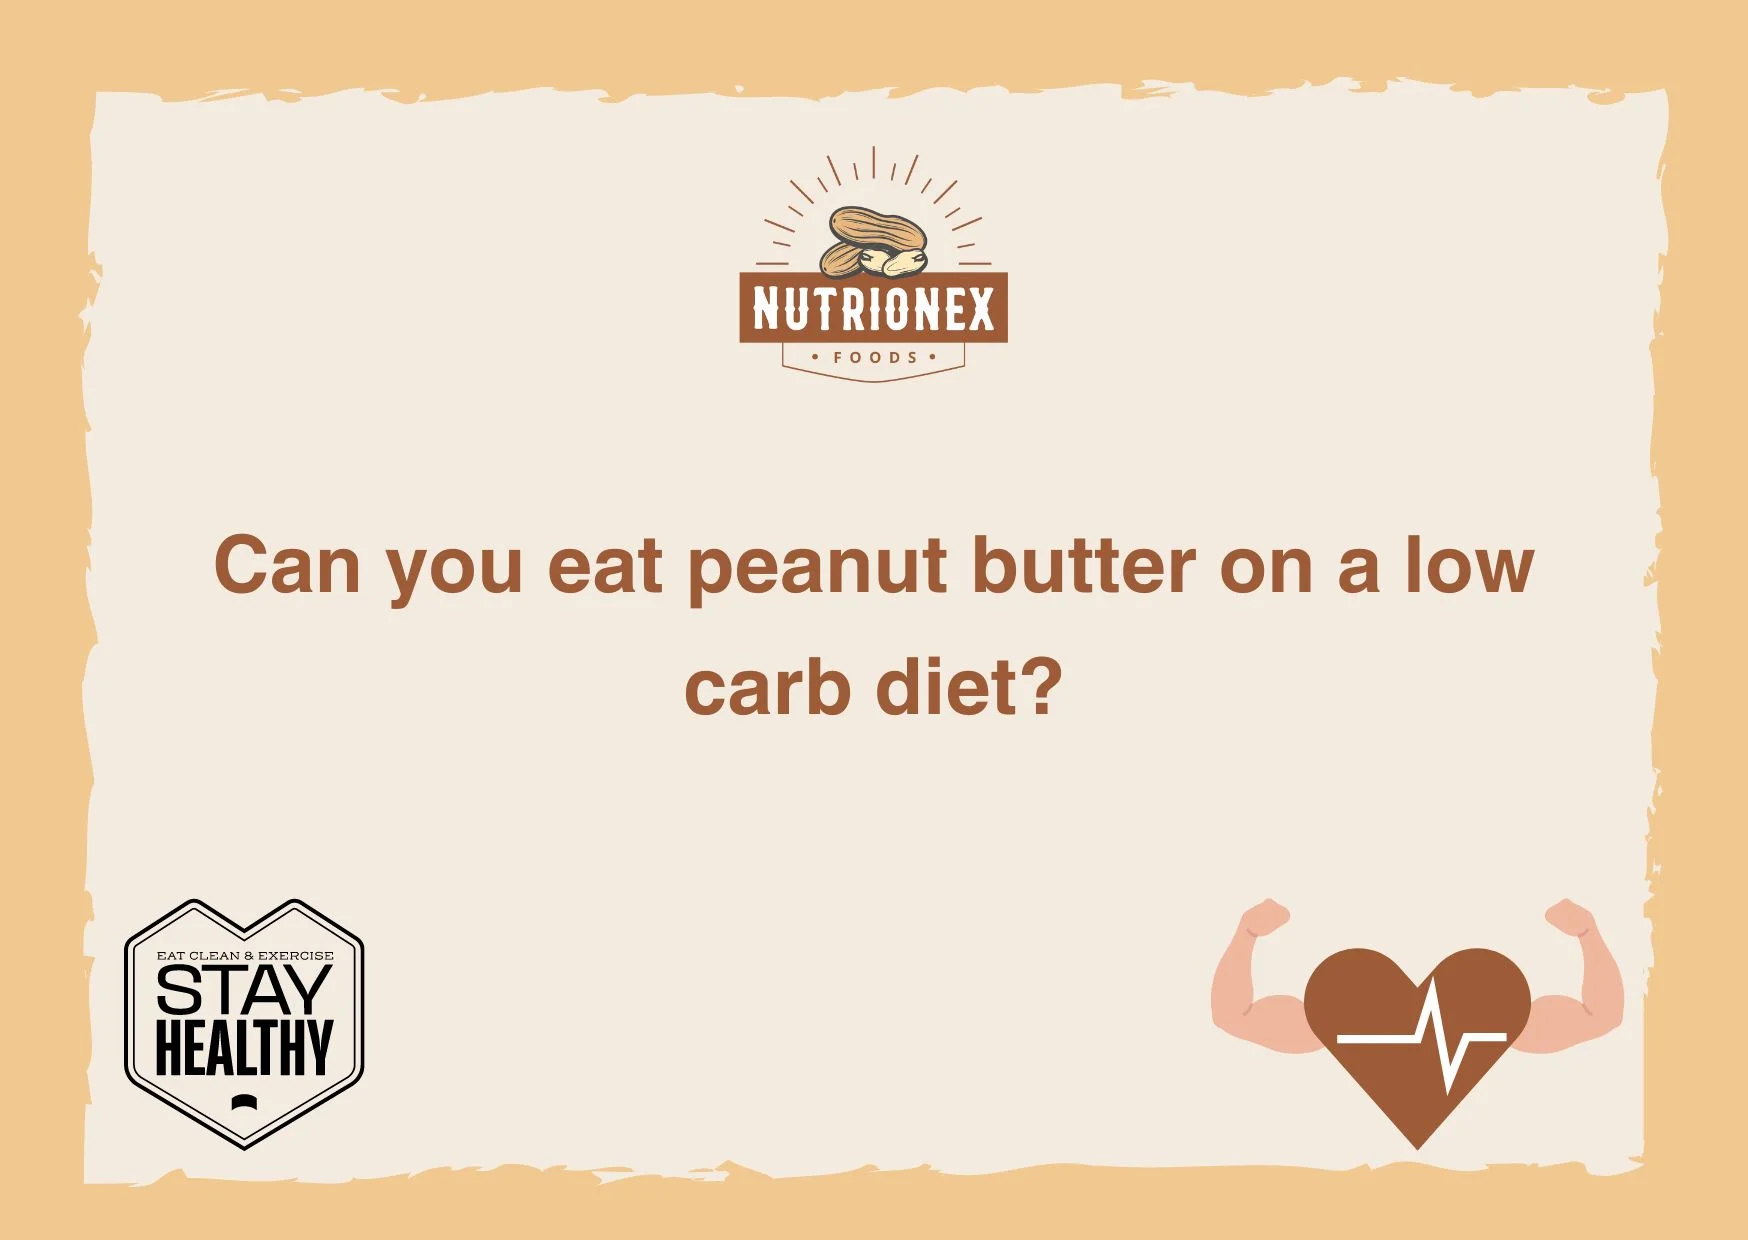 Can You Eat Peanut Butter On A Low Carb Diet?